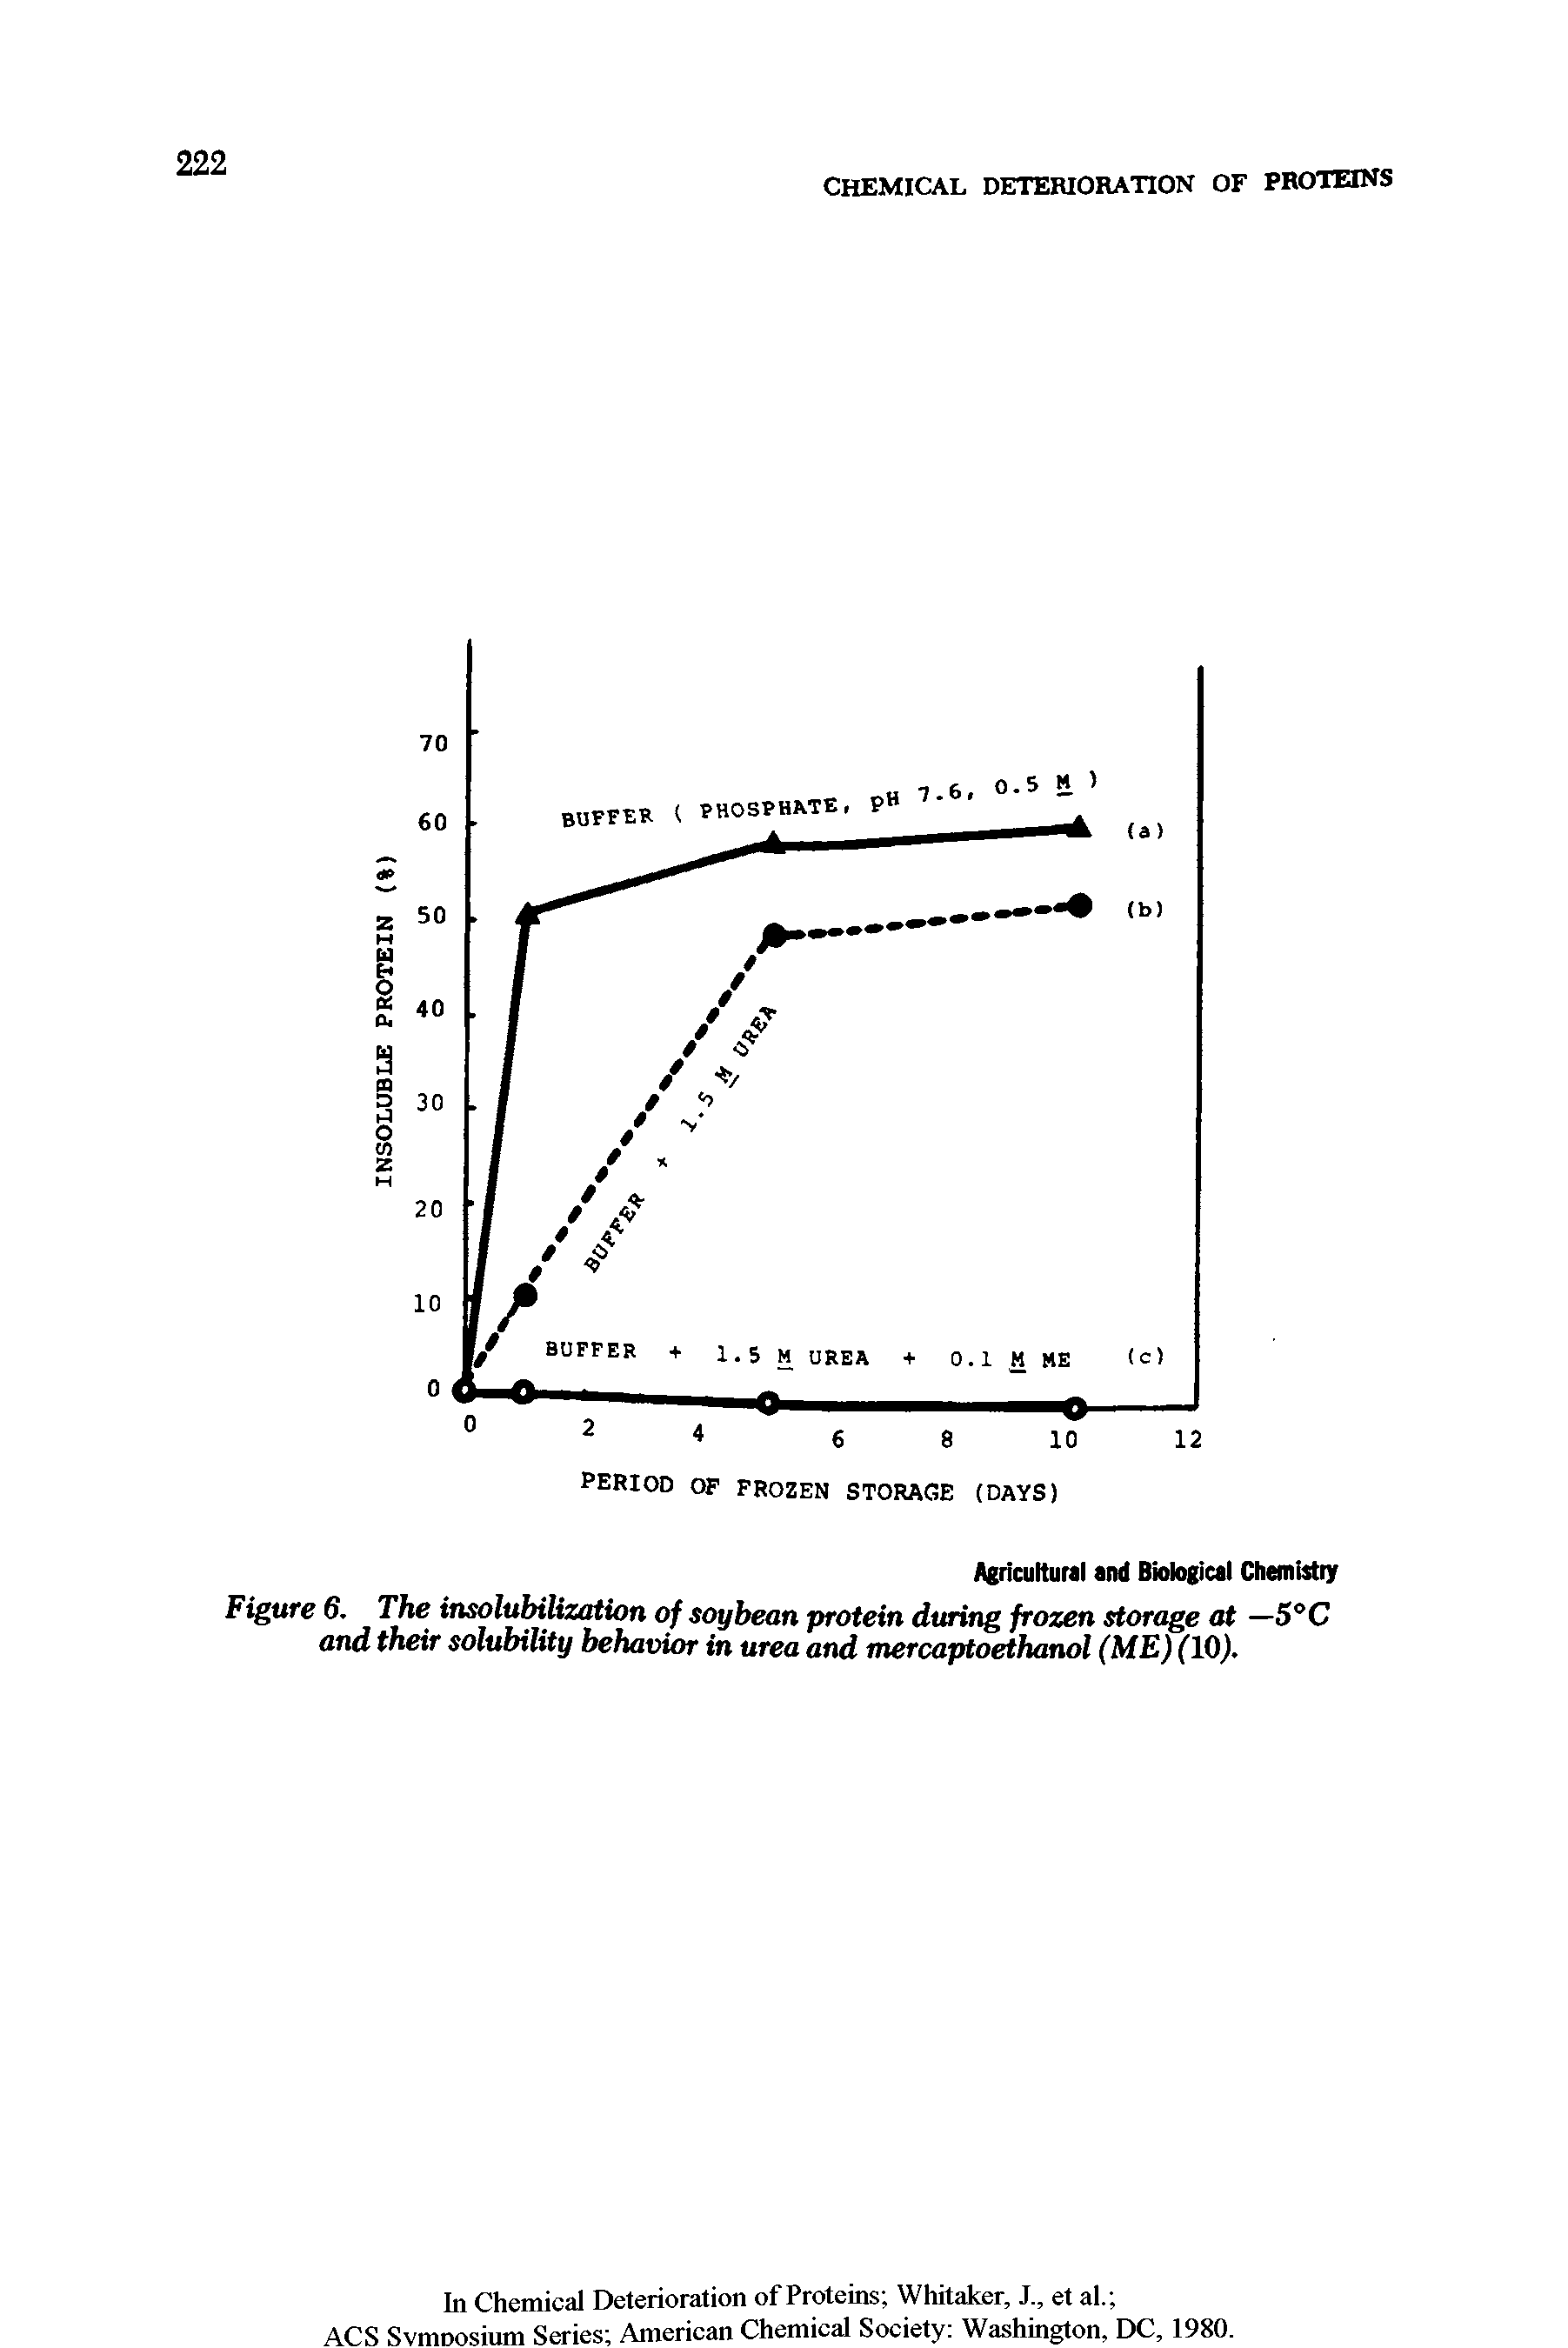 Figure 6. The insolubitization of soybean protein during frozen storage at —5°C and their solubility behavior in urea and mercaptoethanol (ME) (10).